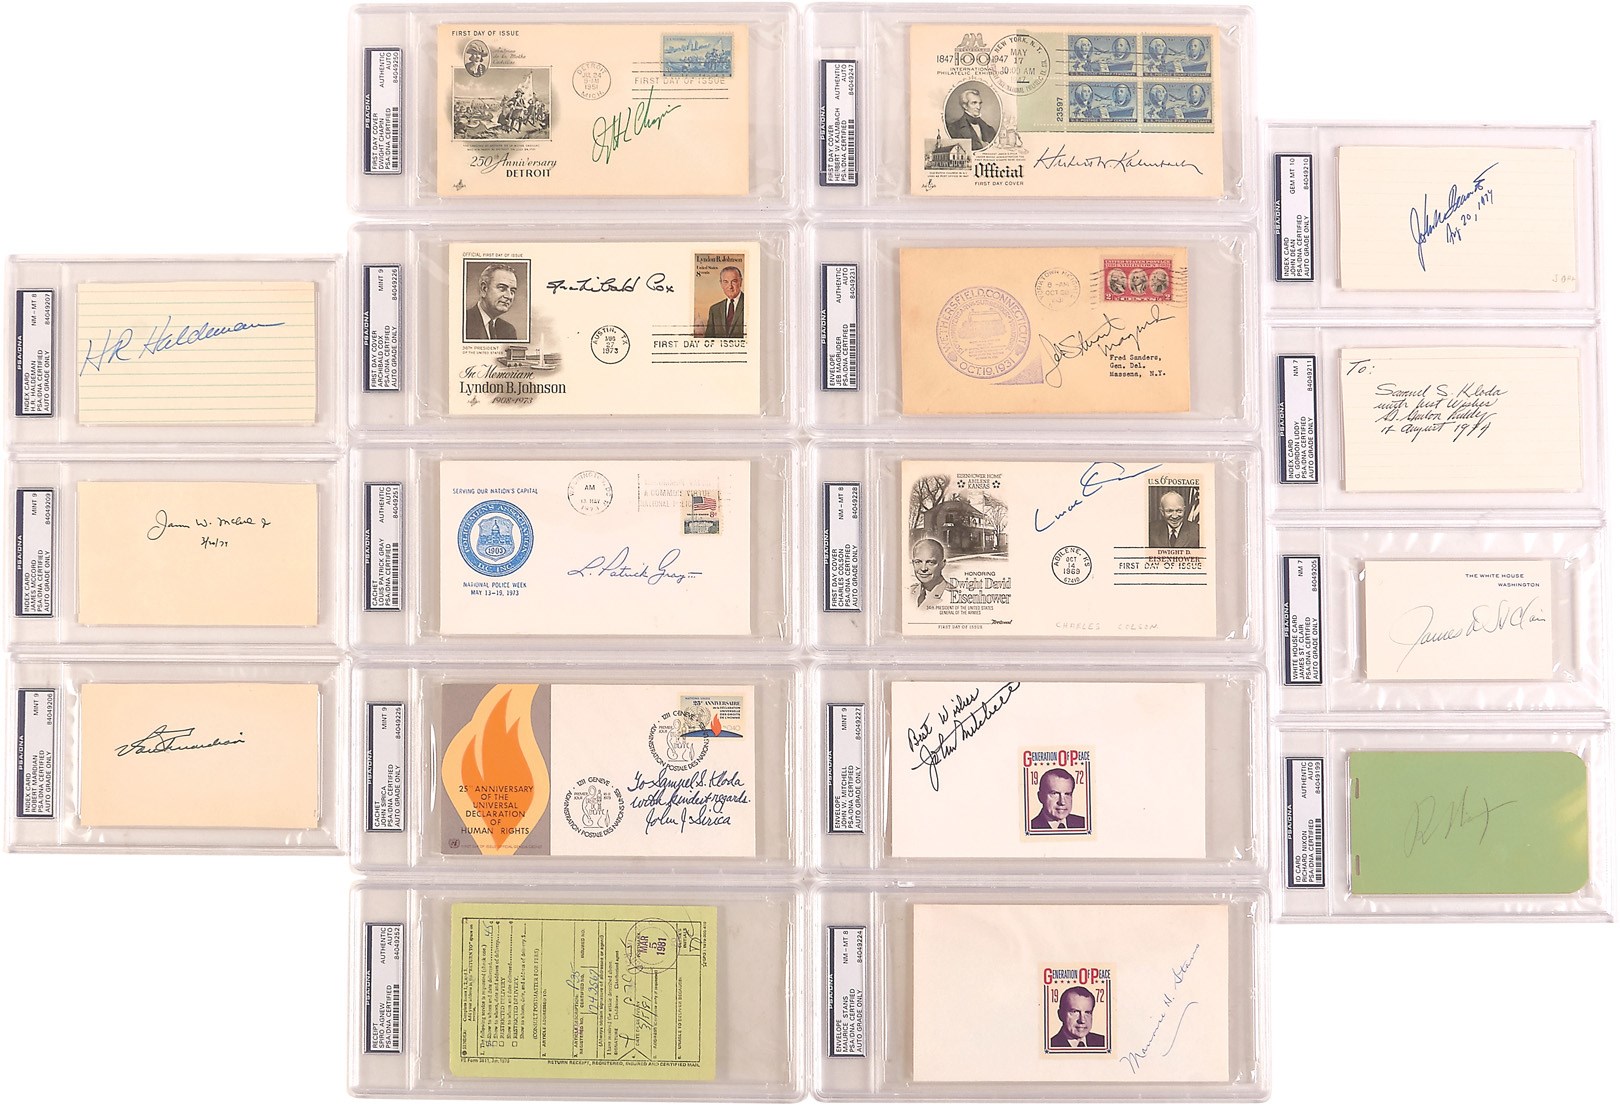 - Watergate Scandal Autograph Collection of Seventeen from an Old Time Collector (All PSA Slabbed)